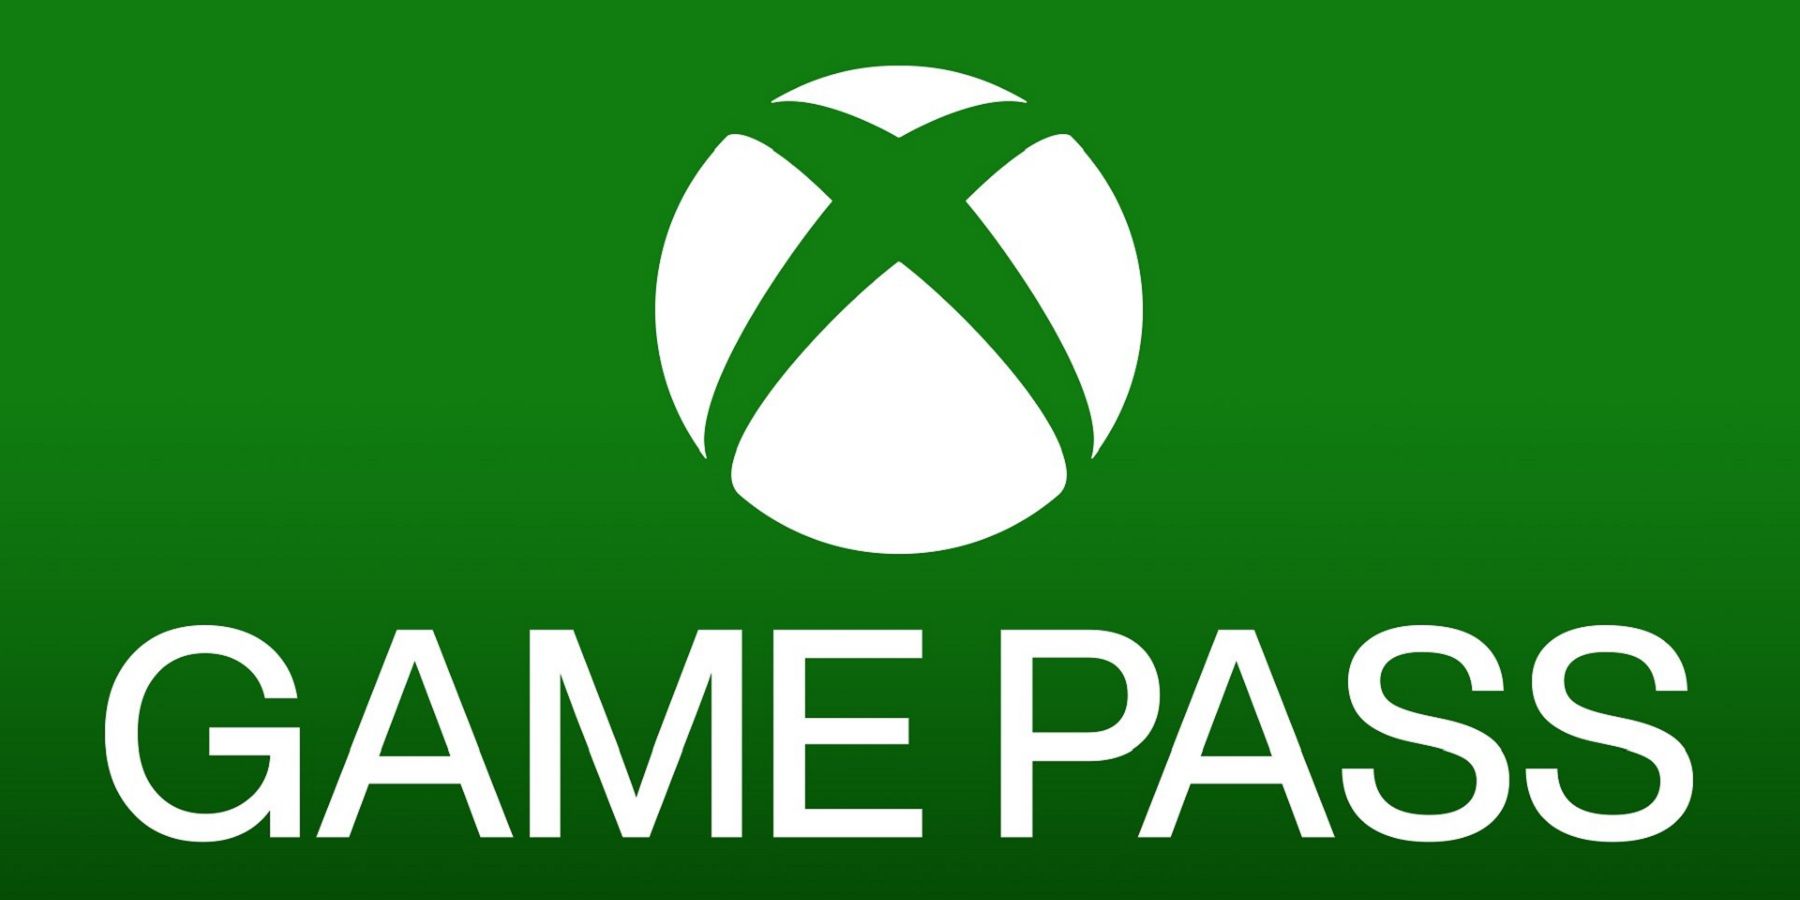 Microsoft confirms new Xbox Game Pass Friends & Family plan and its pricing  - The Verge